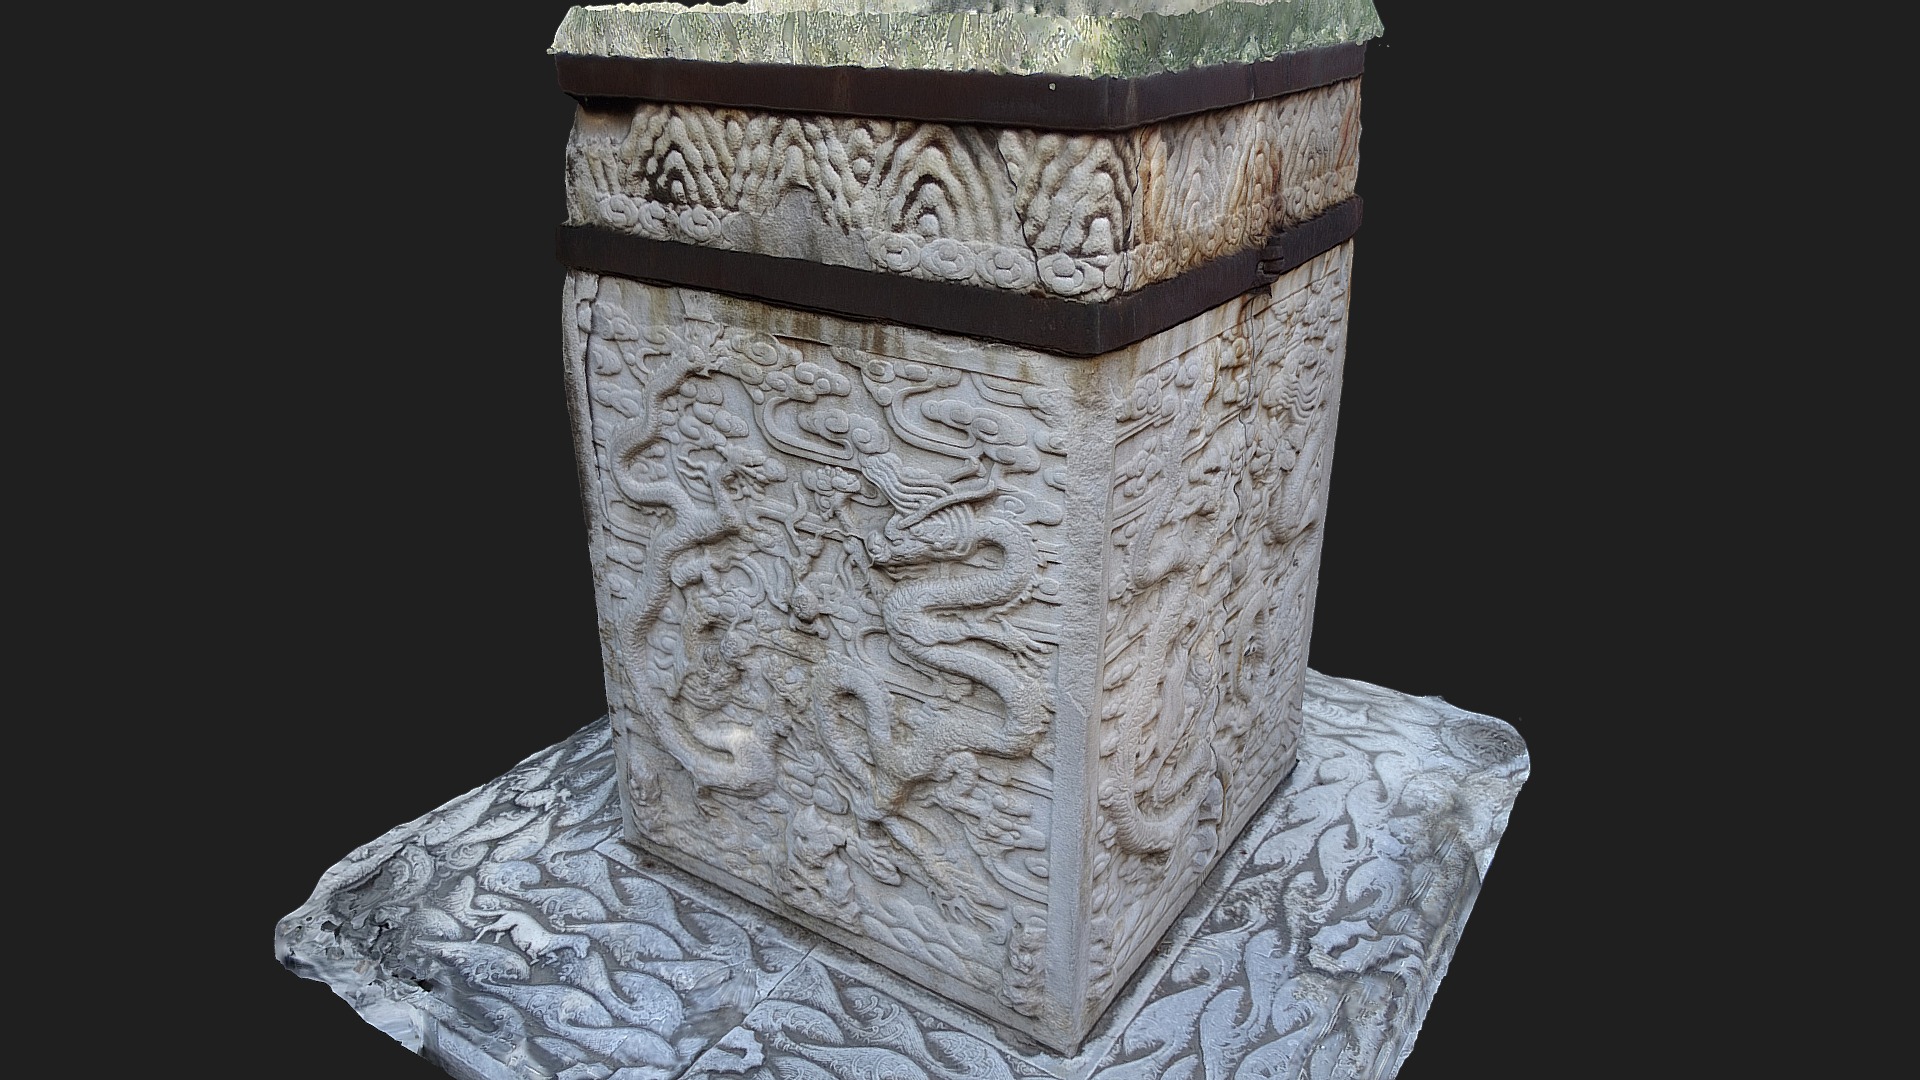 3D model 2016-09 – Beijing 07 - This is a 3D model of the 2016-09 - Beijing 07. The 3D model is about a stone pillar with carvings.